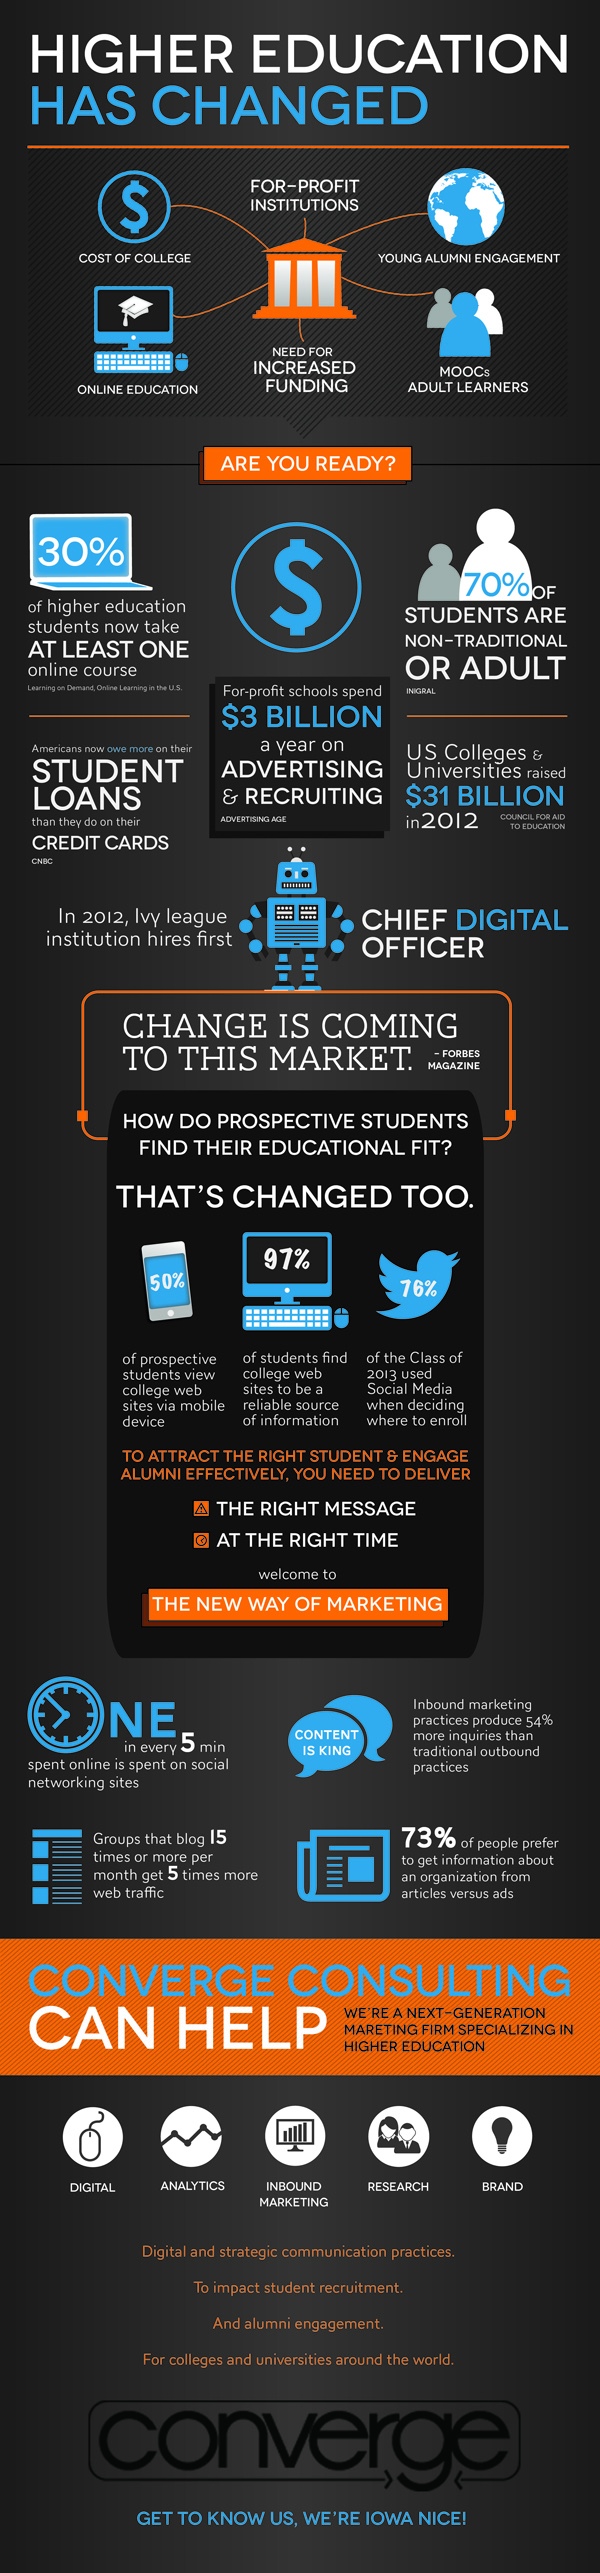 Higher education marketing has changed. Are you ready?